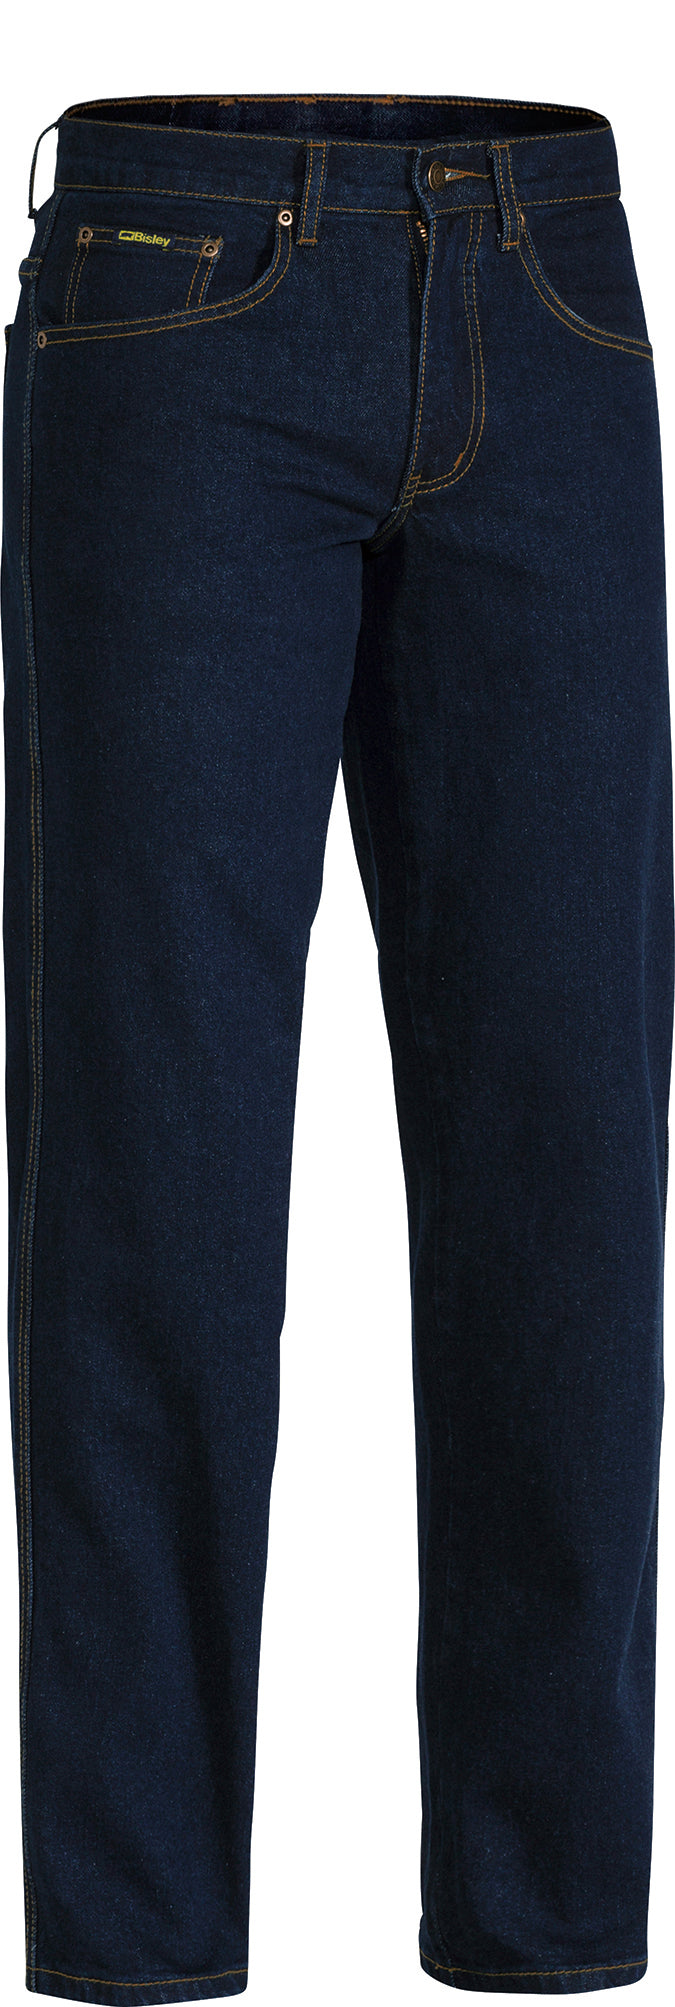 Load image into Gallery viewer, Wholesale BP6712 Bisley Rough Rider Denim Stretch Jeans - Regular Printed or Blank
